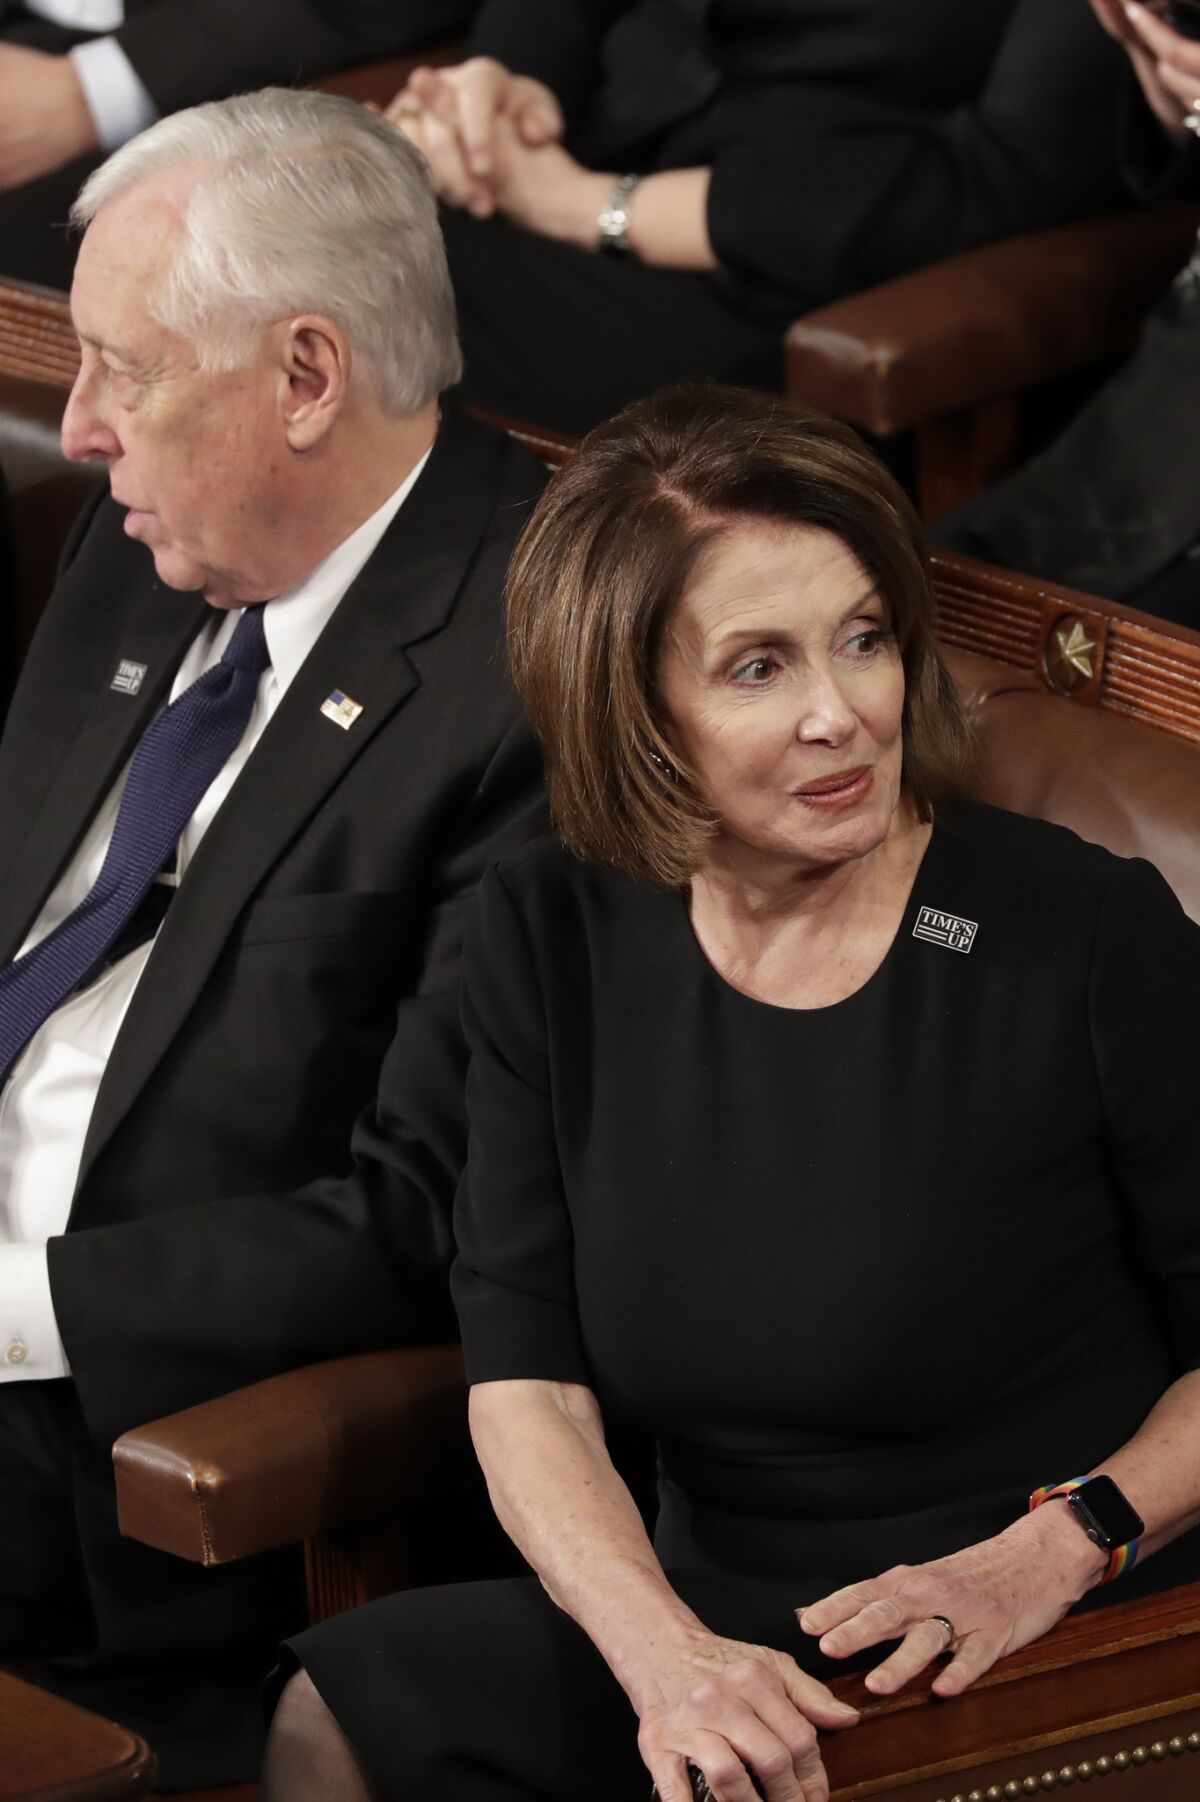 House Minority Leader Nancy Pelosi, D-Calif, and Minority Whip Steny Hoyer, D-Md., both wore Time's Up pins at Tuesday's State of the Union address.